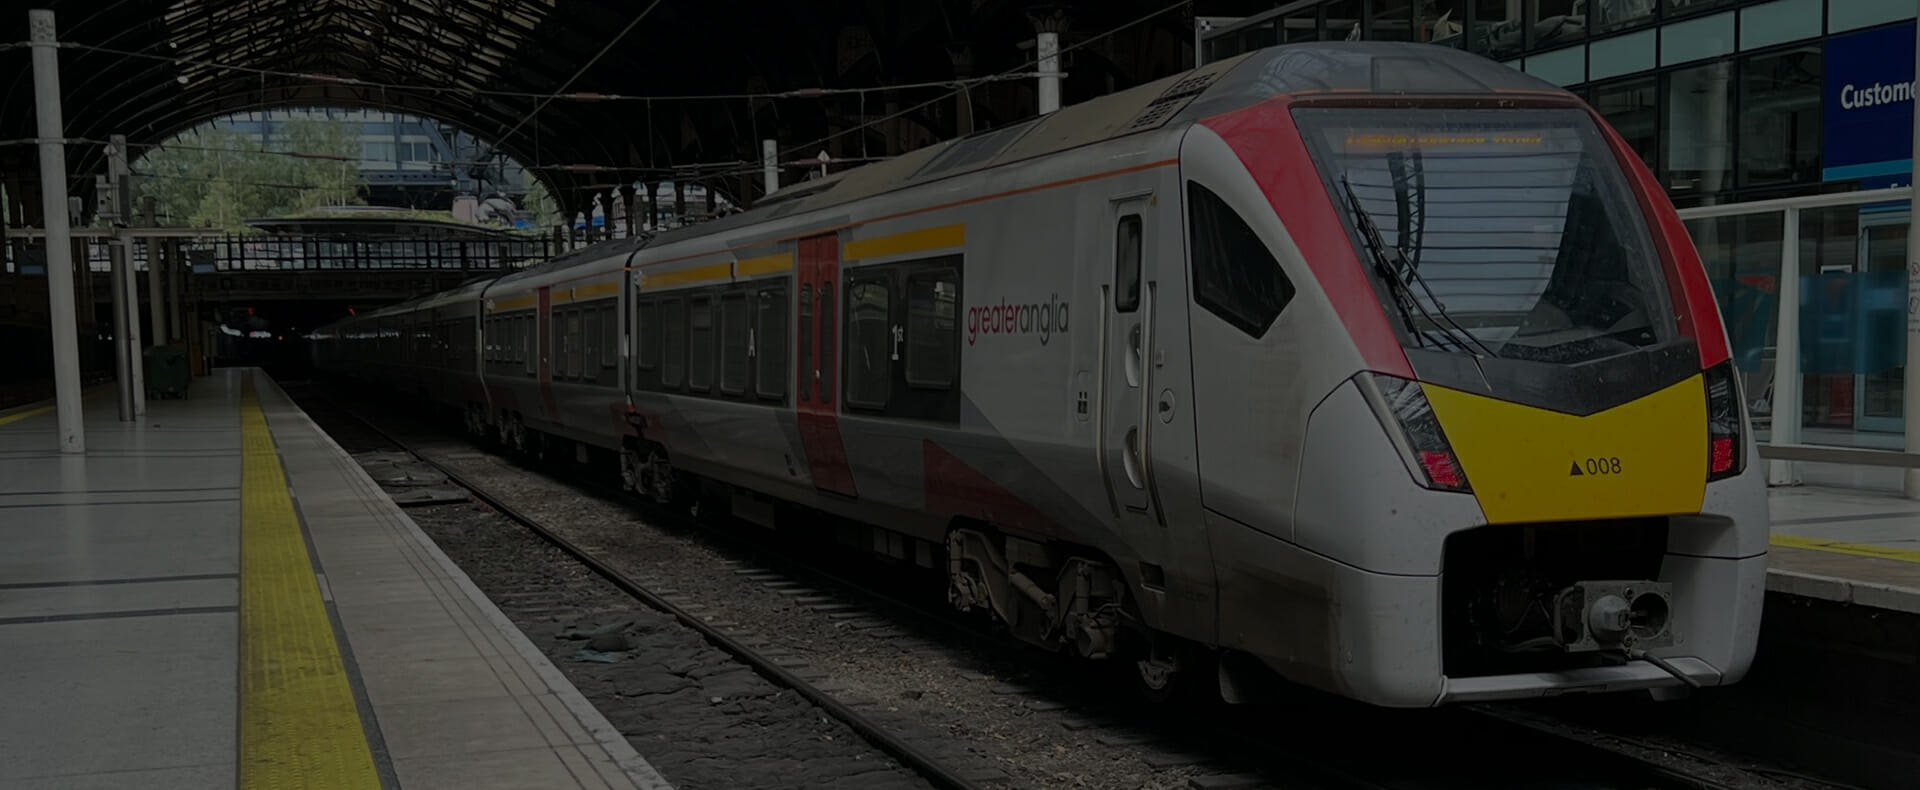 greater anglia train on route